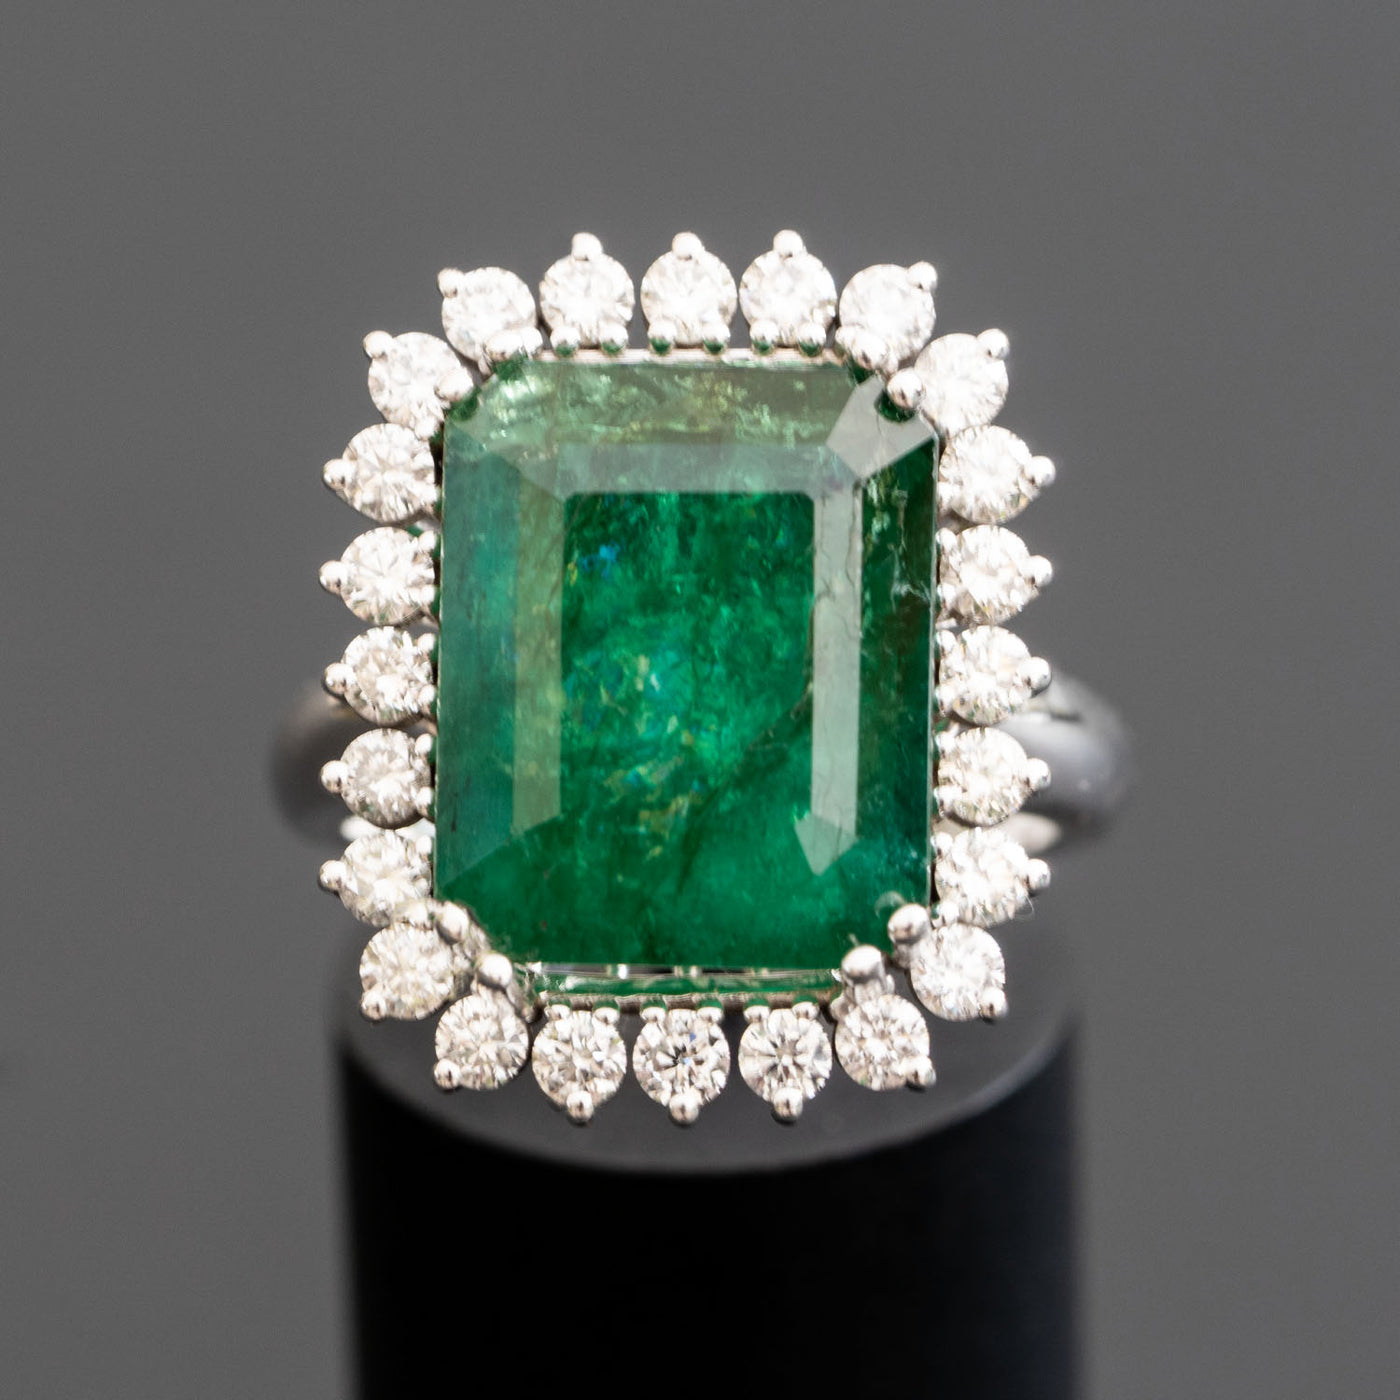 The Green That Brings the Grin - 10 Facts about Emerald